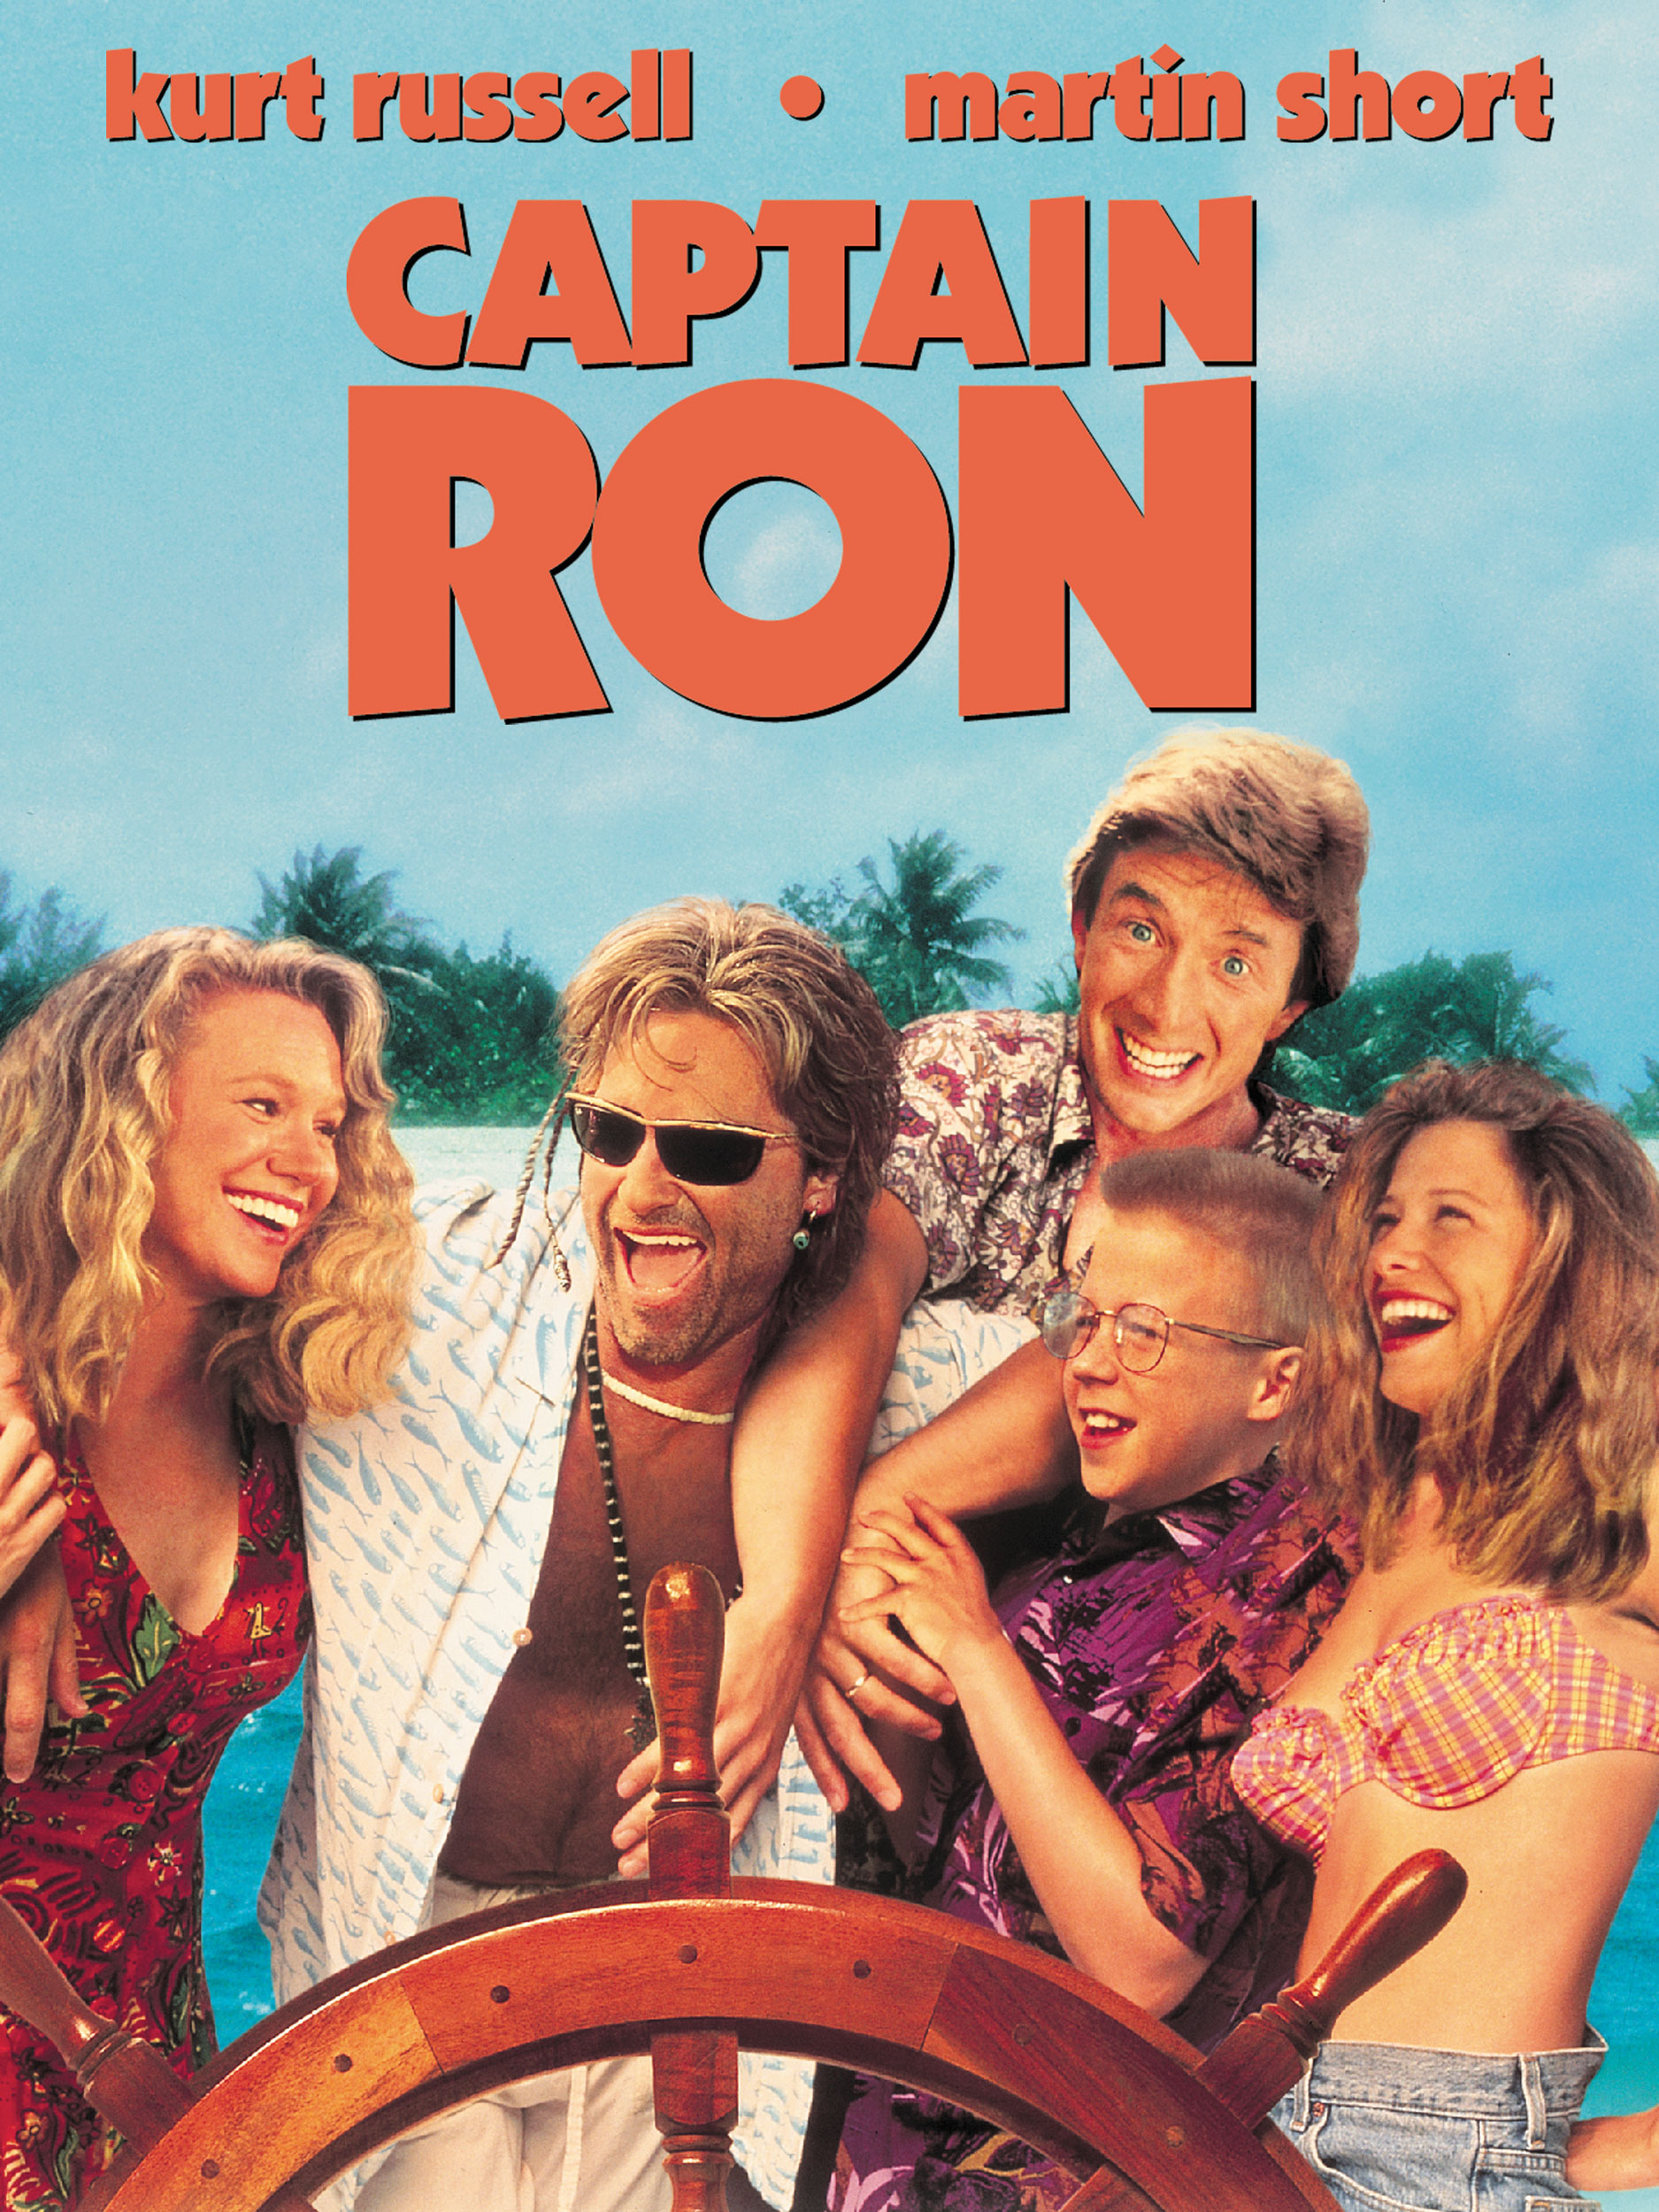 Captain ron where to watch